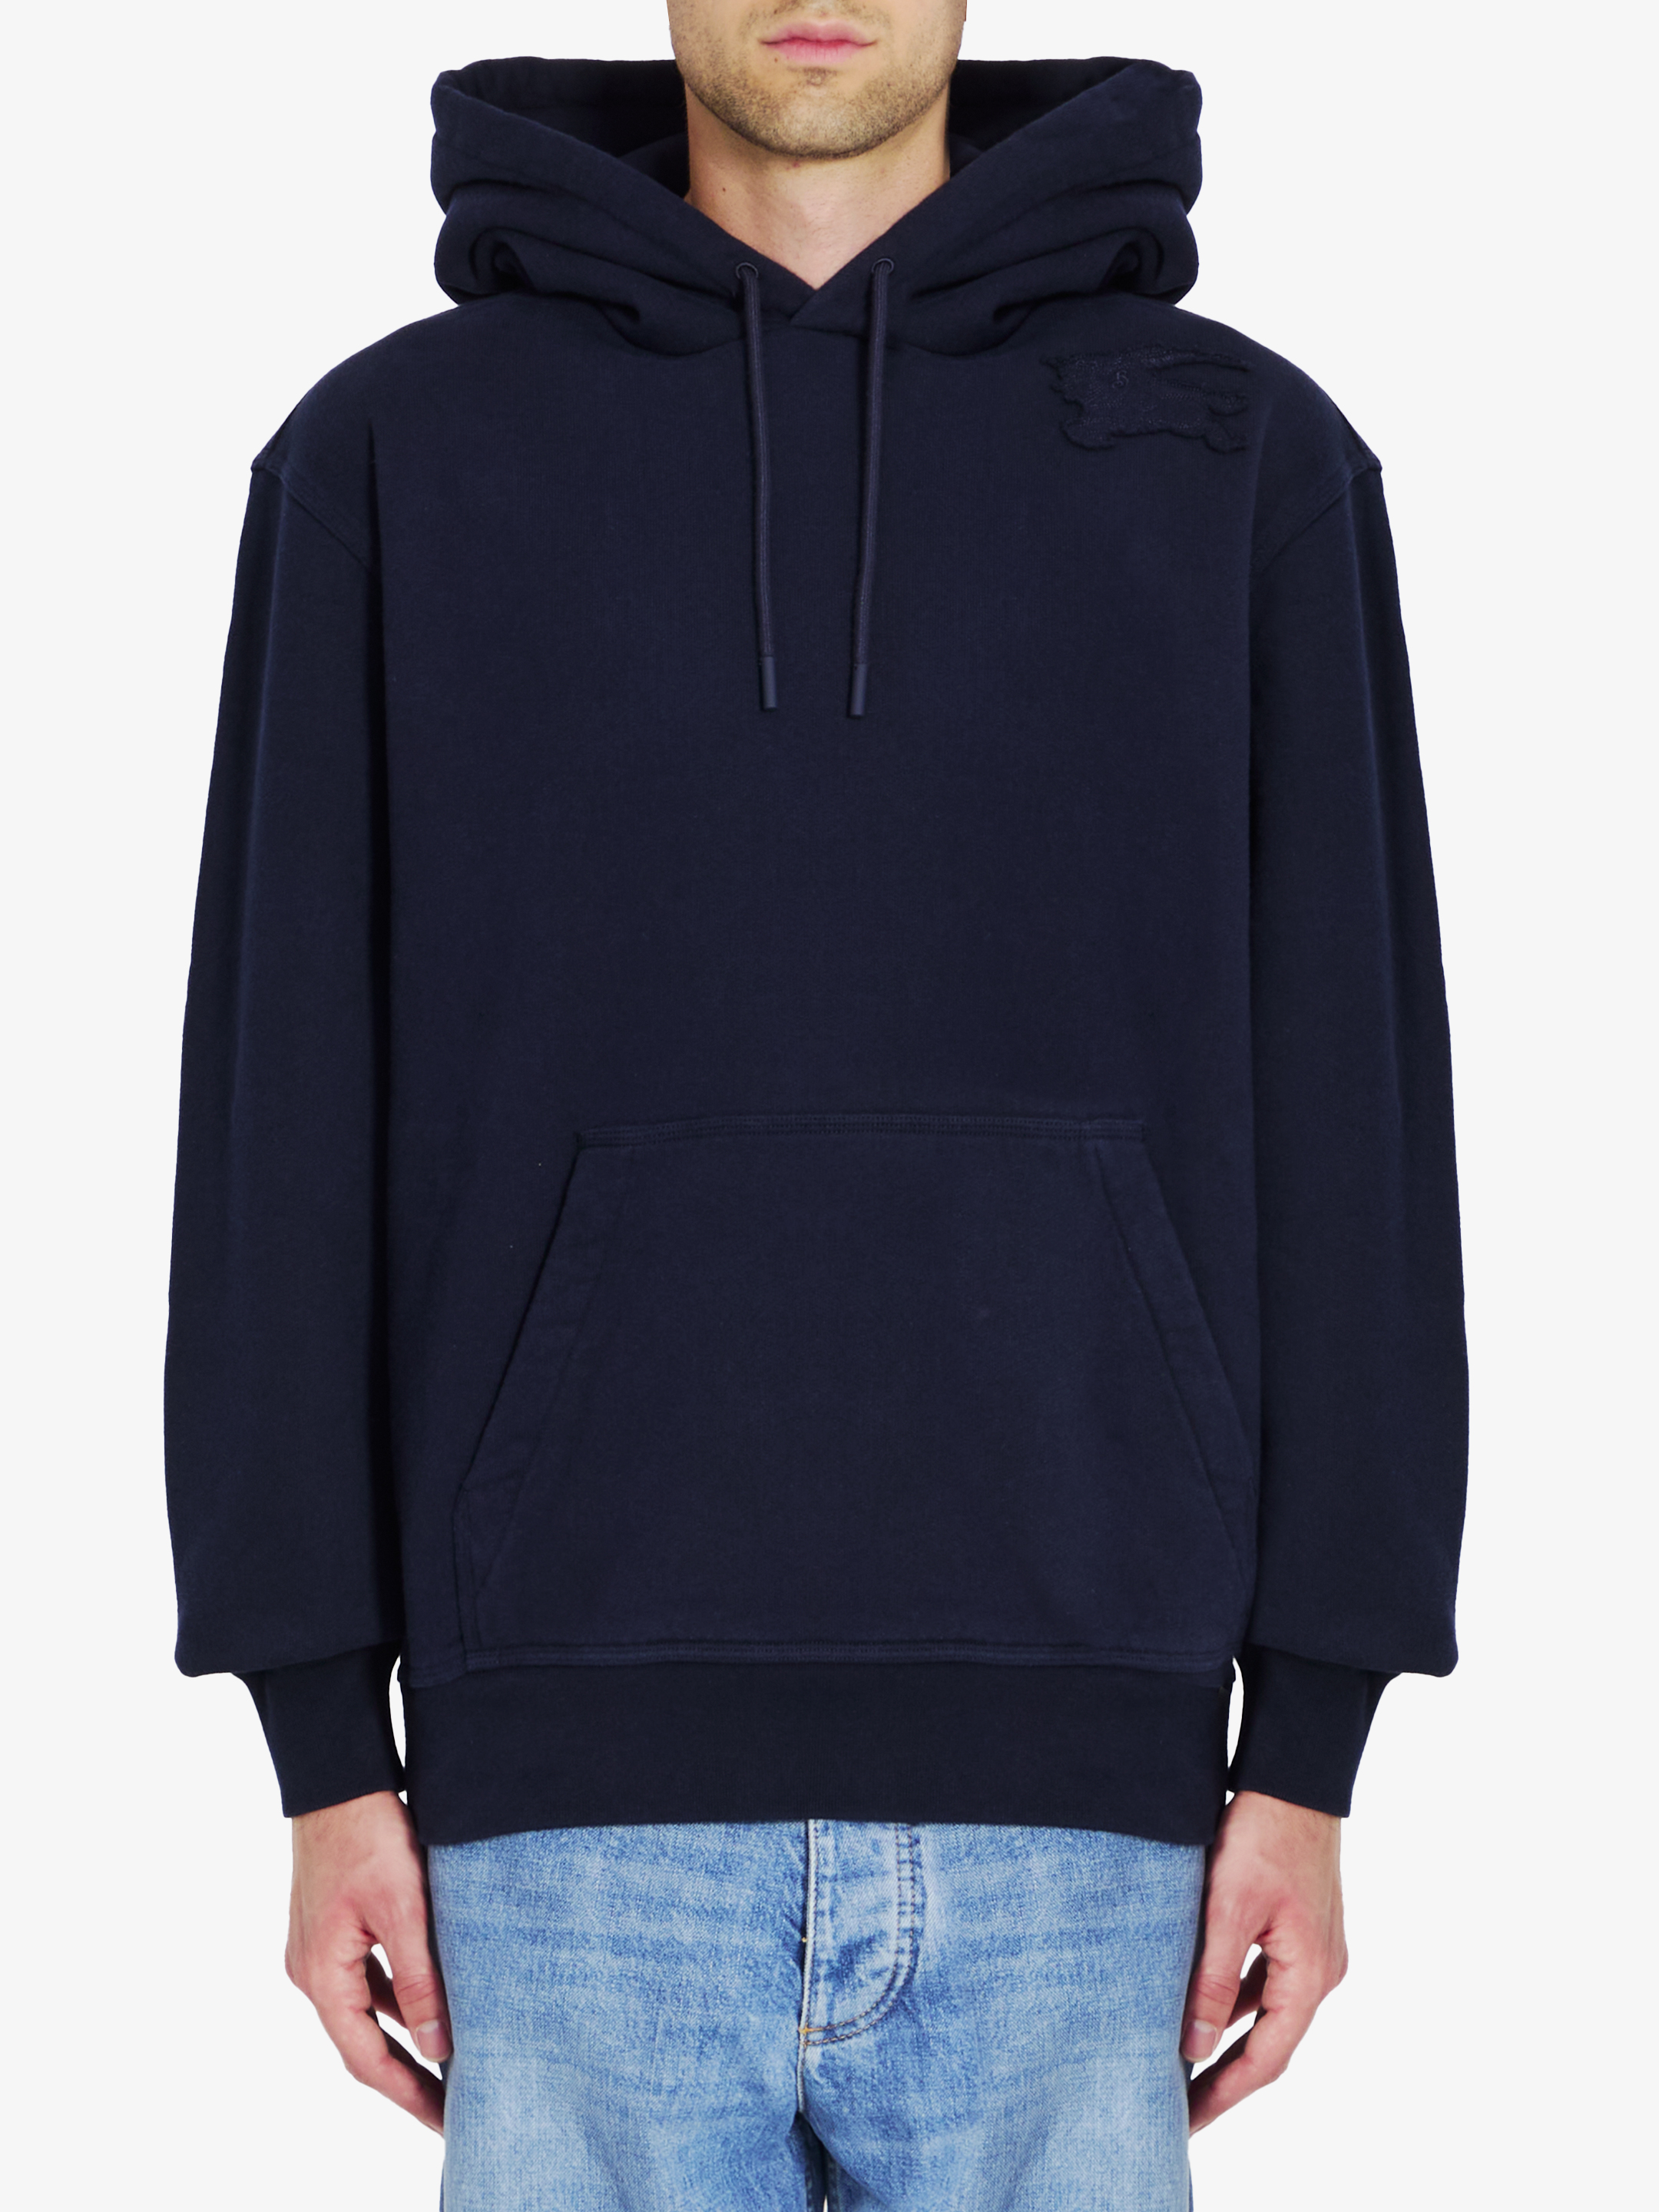 Burberry Hoodie With Equestrian Knight Design In Blue